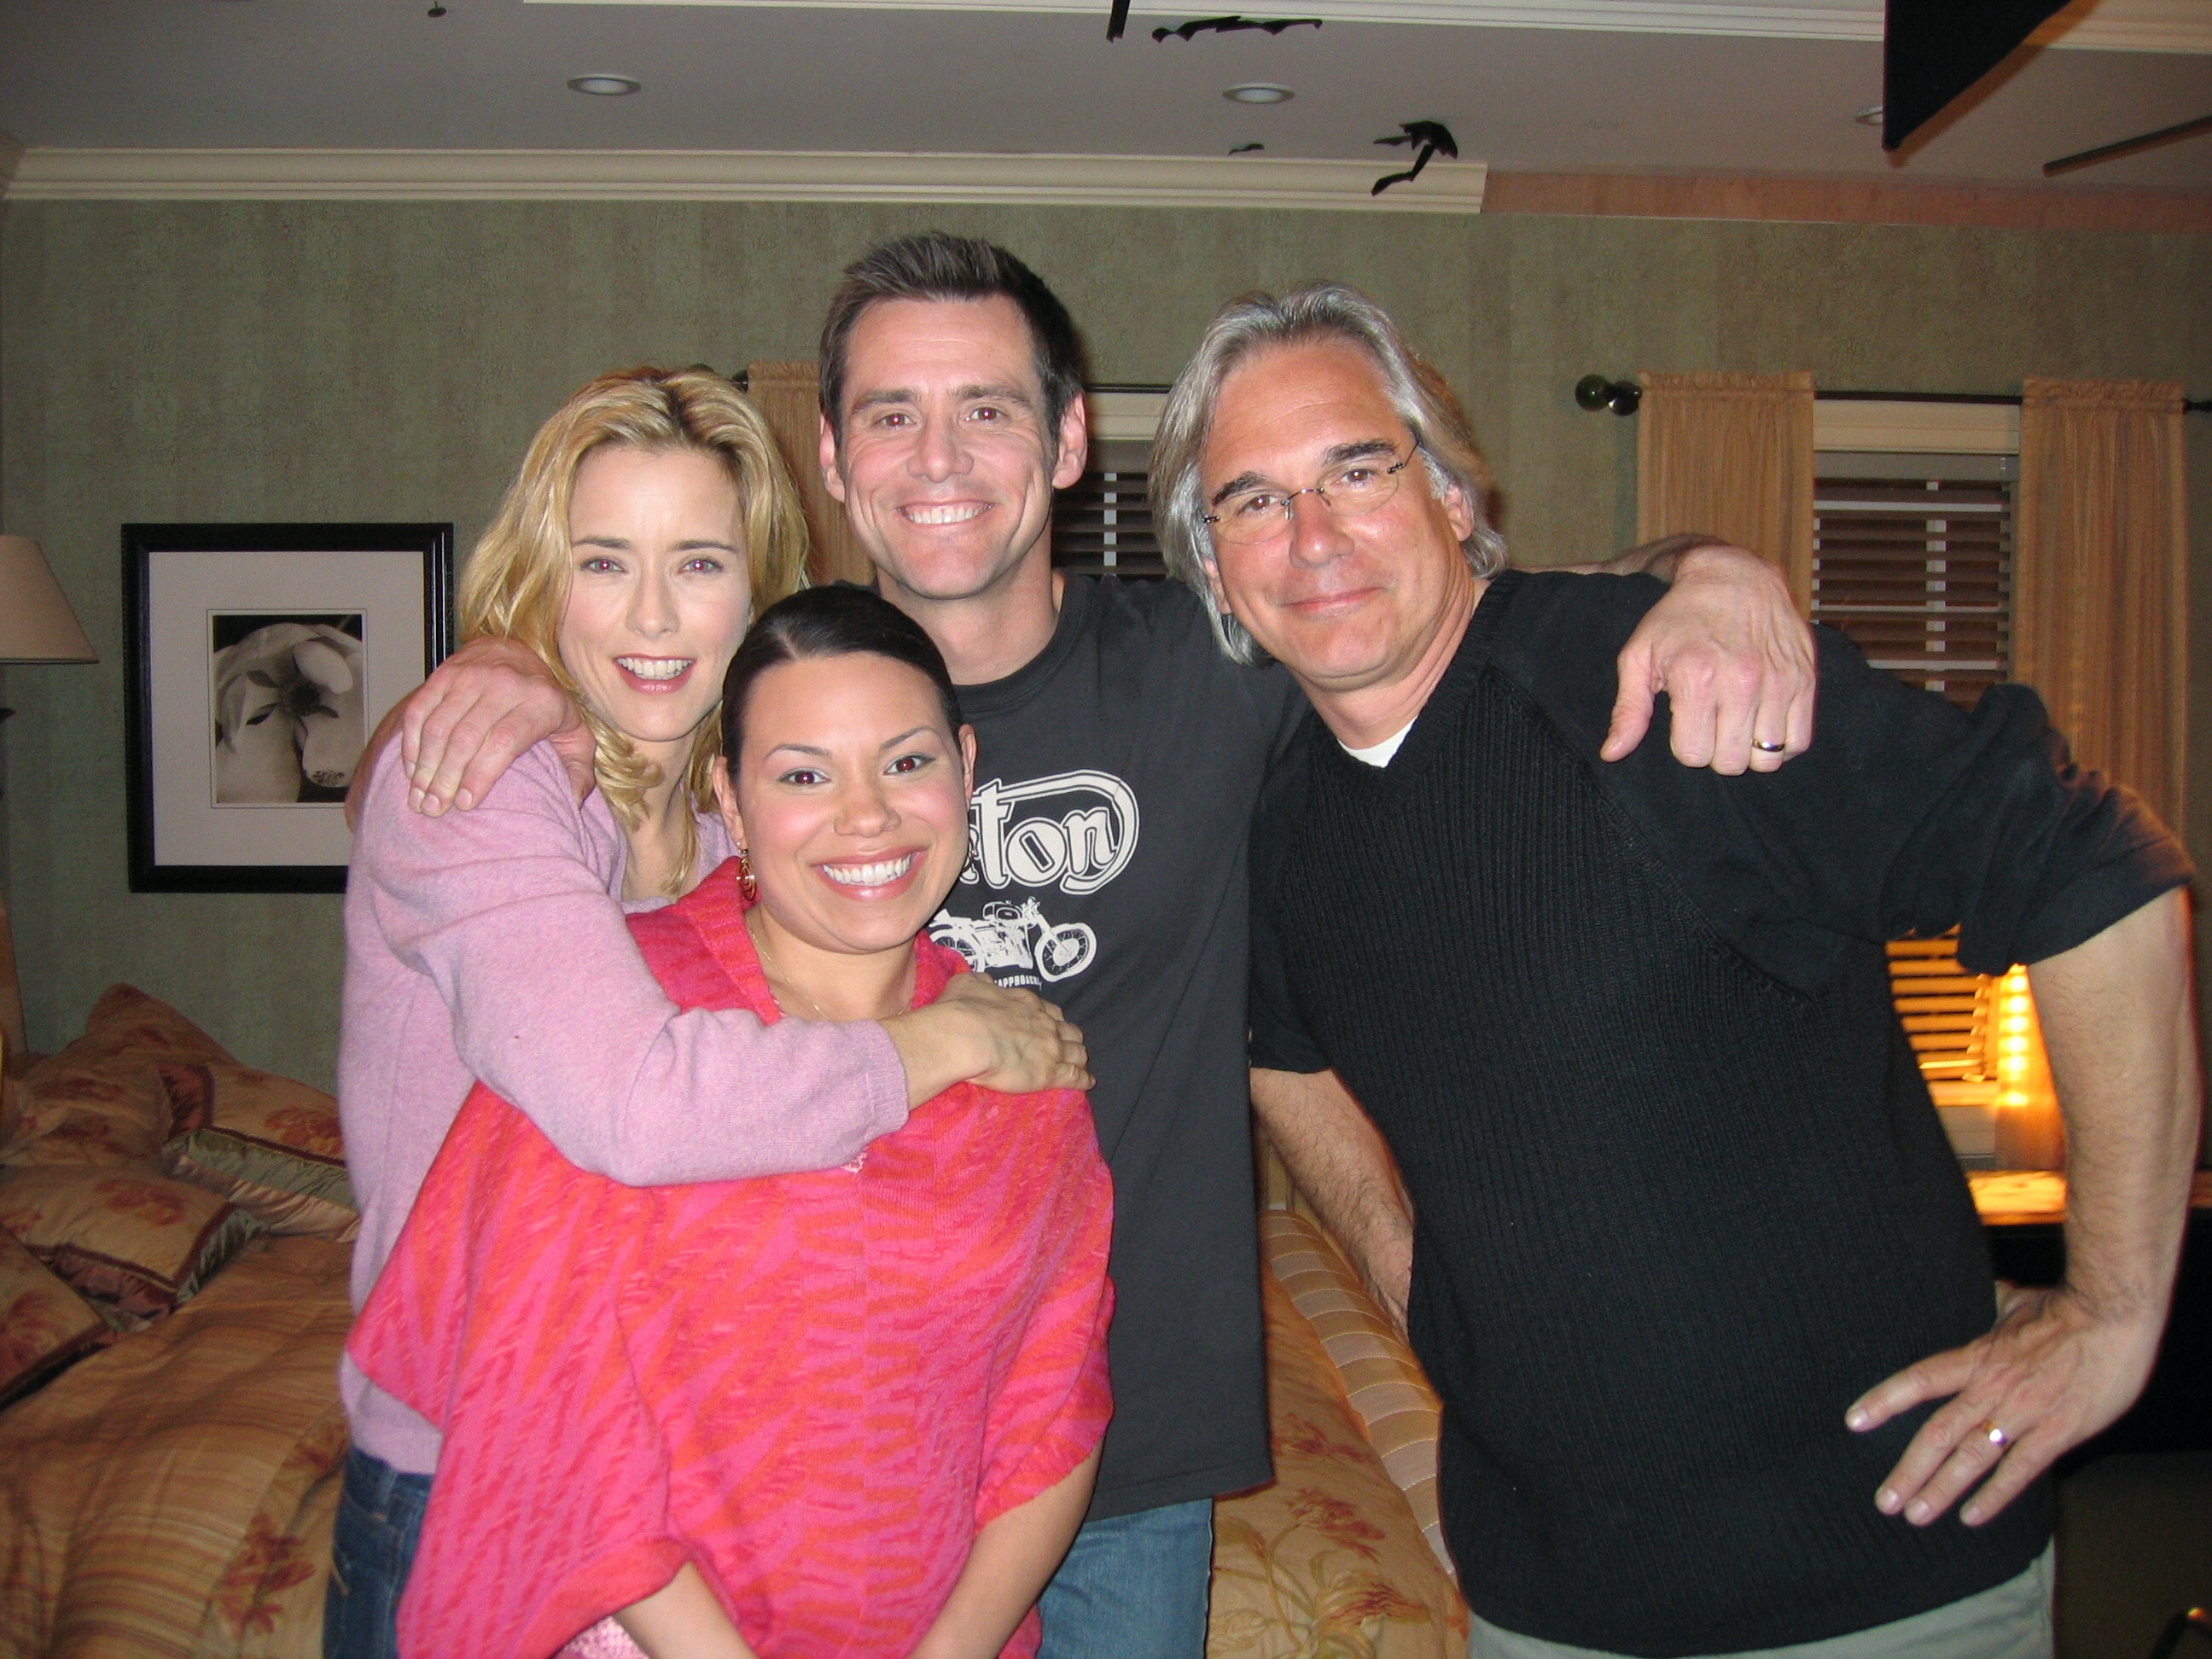 On set of Fun With Dick and Jane, 2004